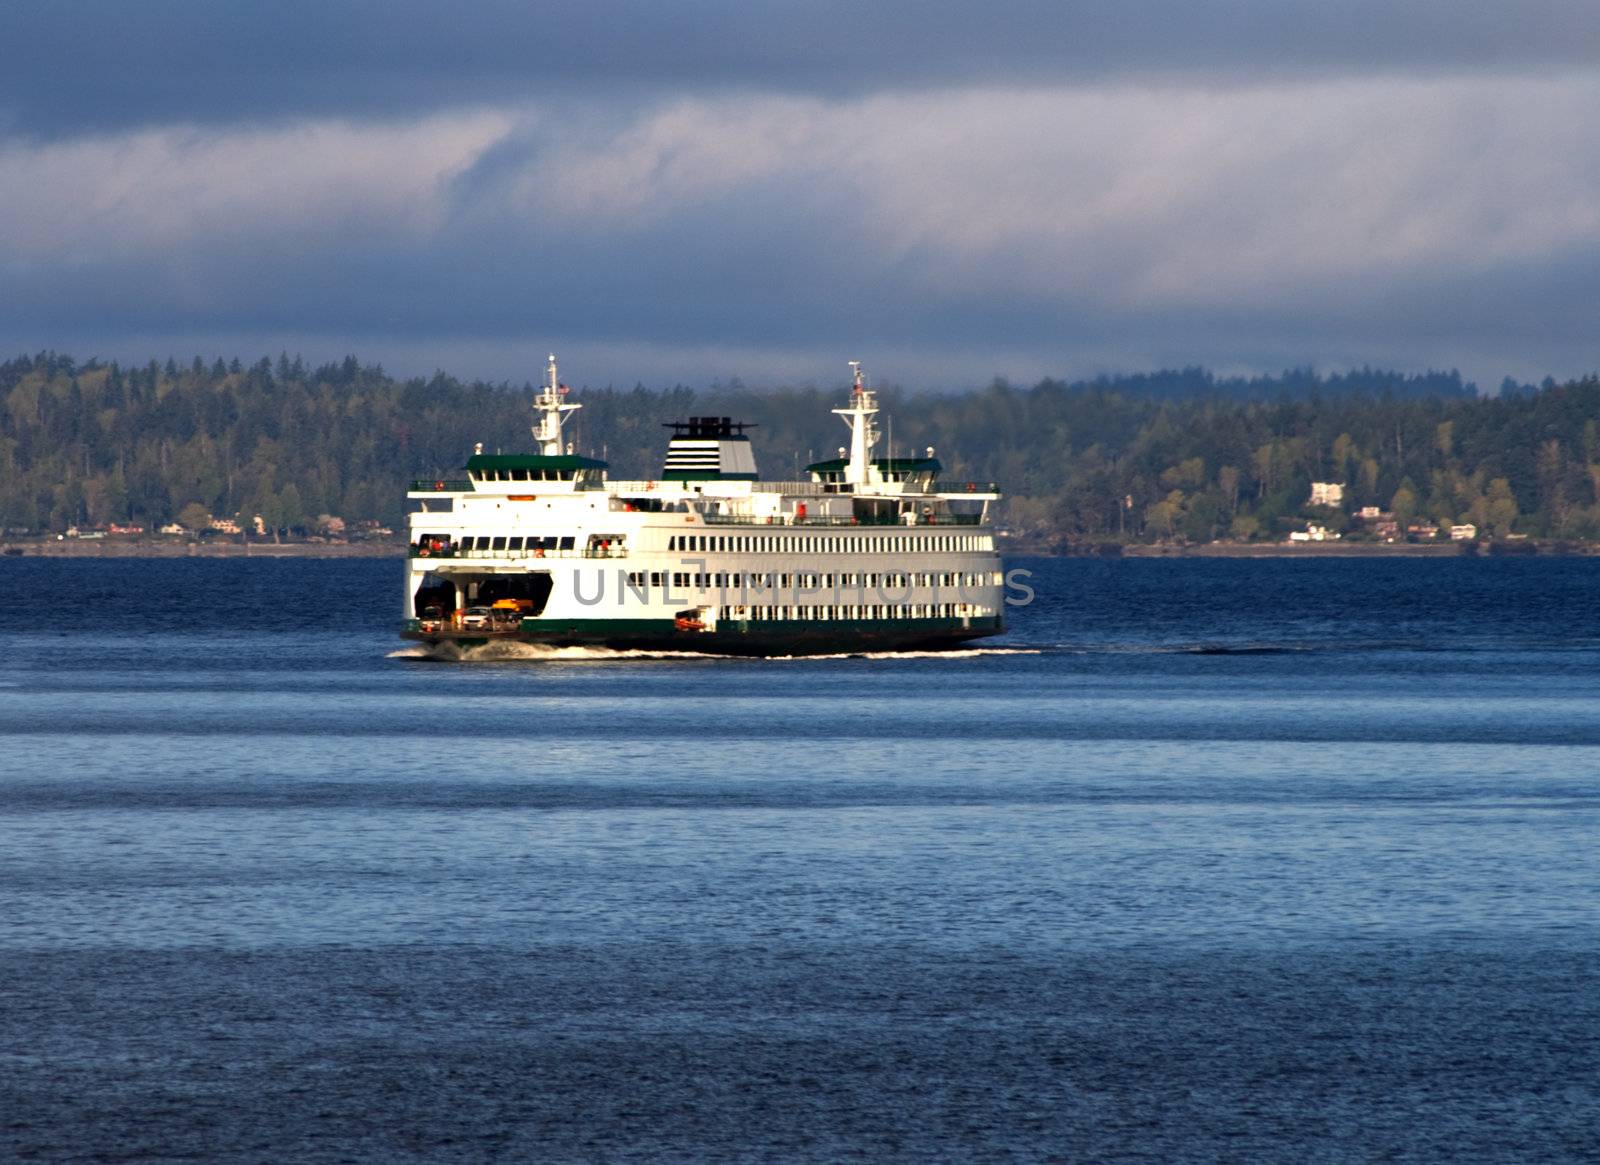 Puget Sound Ferry v1 is one of the many Ferries in the state of Washington captured near Seattle. There is a cloudy sky which is common sight for the region.
